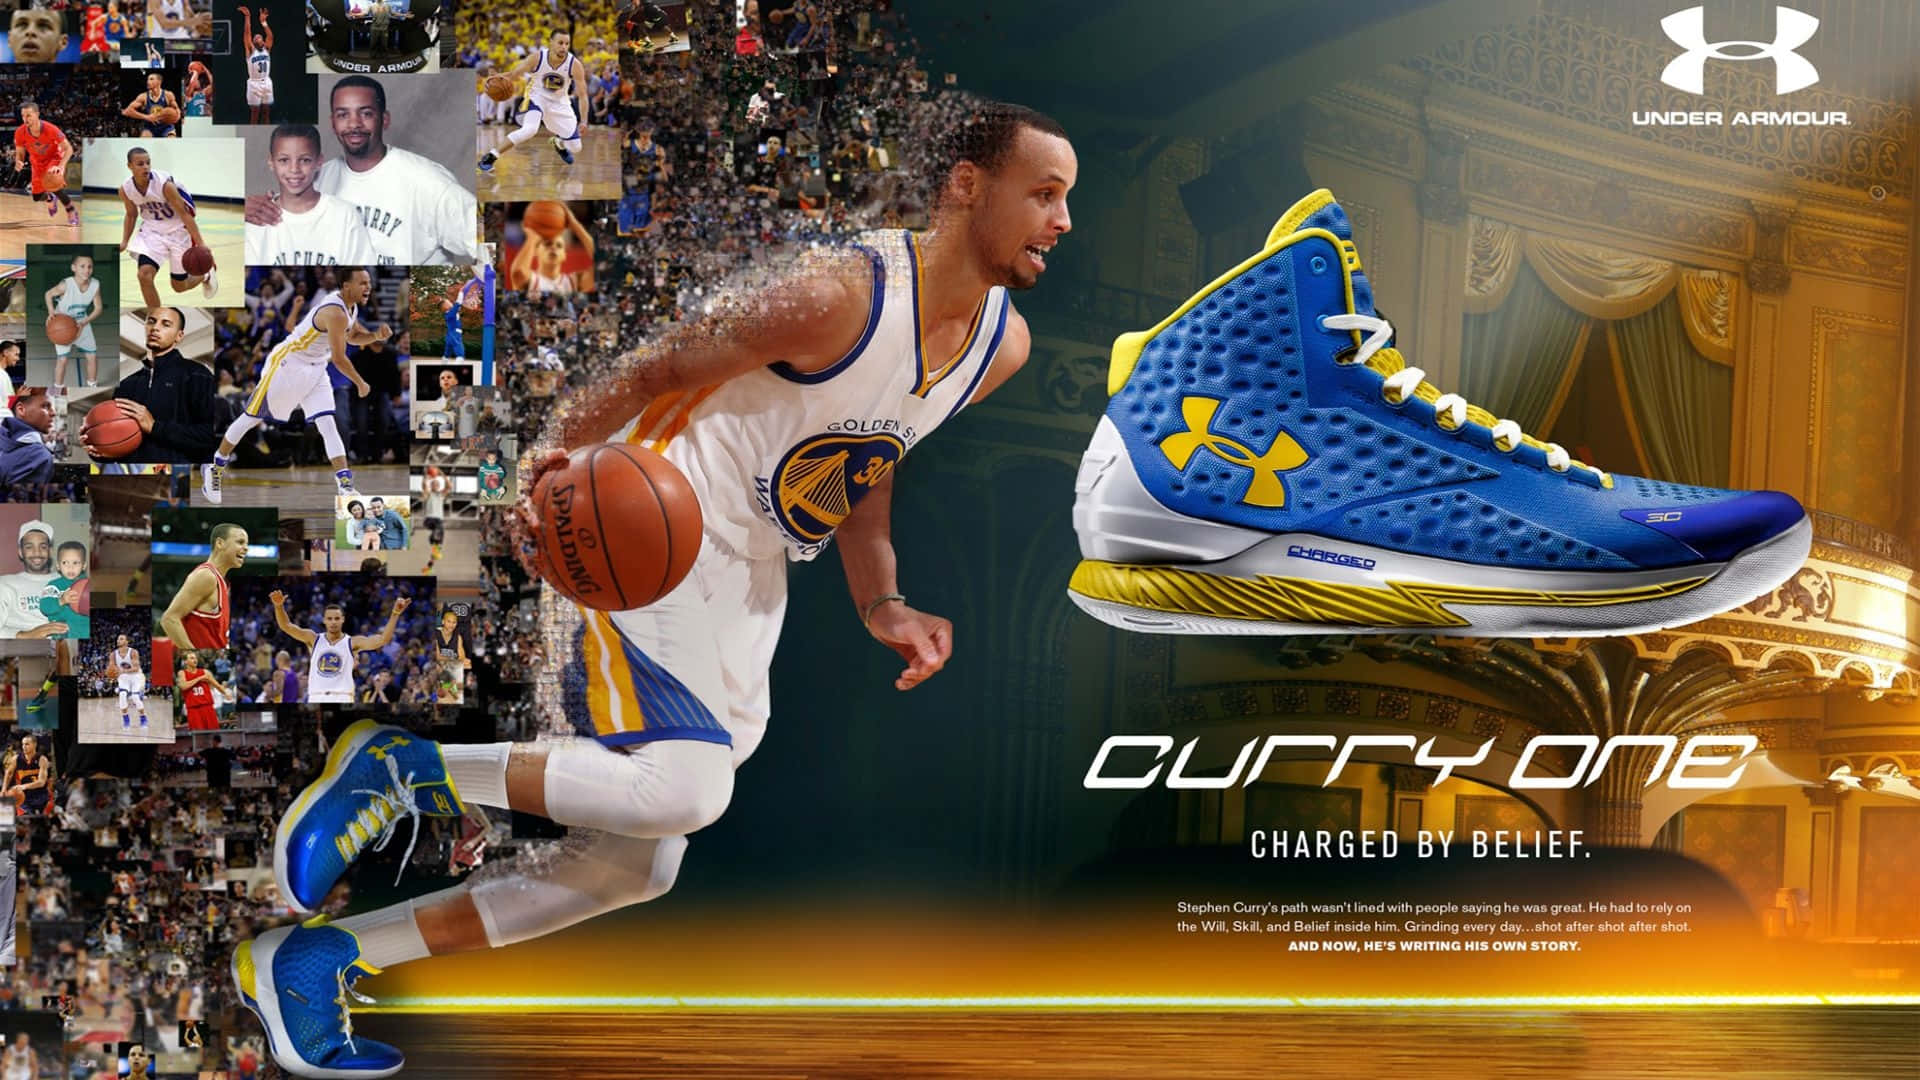 Download Stephen Curry Showing Off His Cool Moves Wallpaper